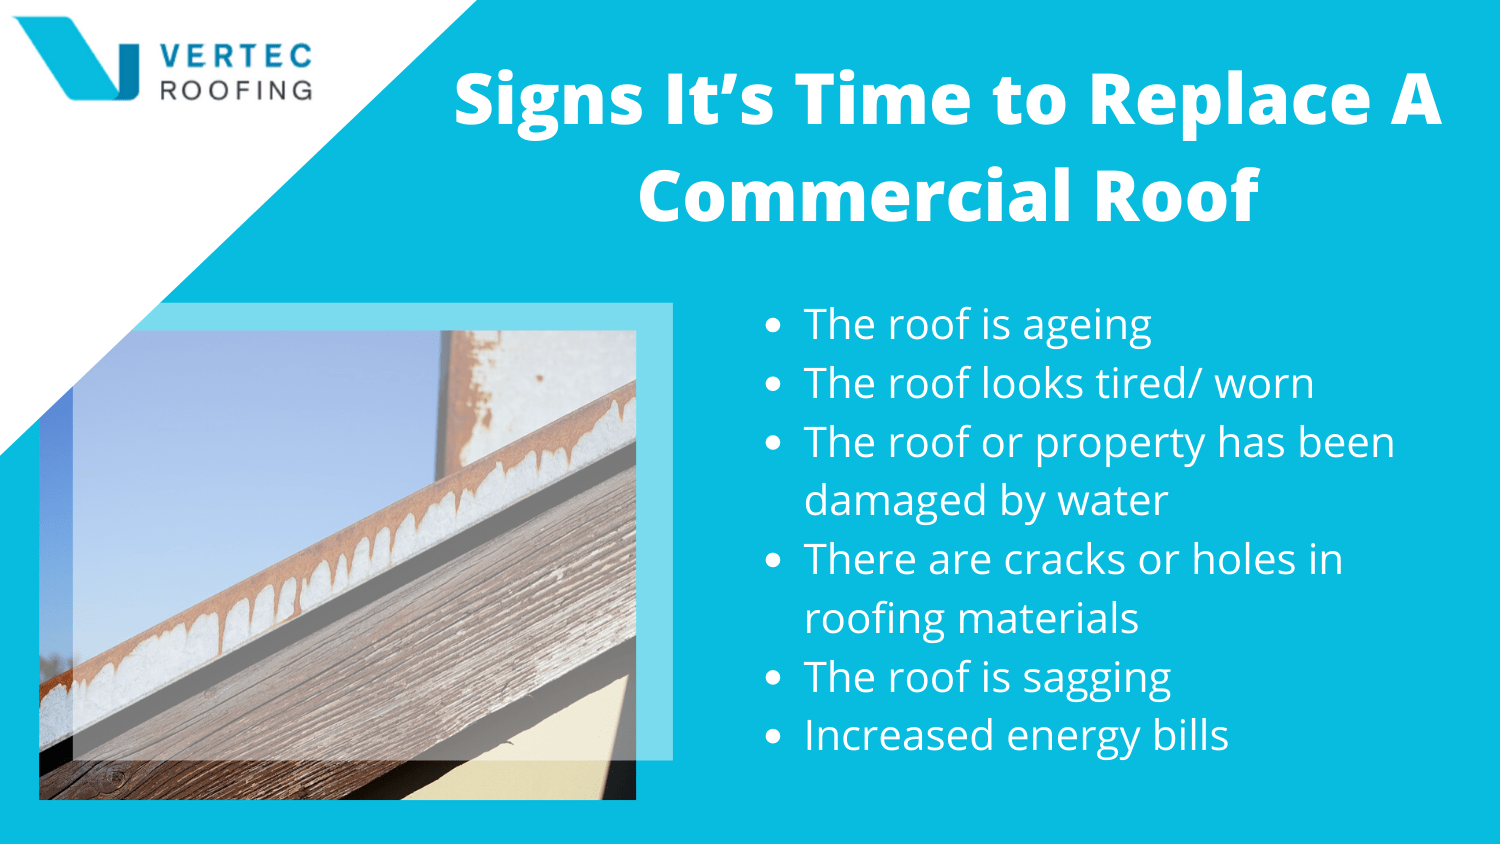 How Much Does It Cost to Replace A Commercial Roof? Vertec Roofing